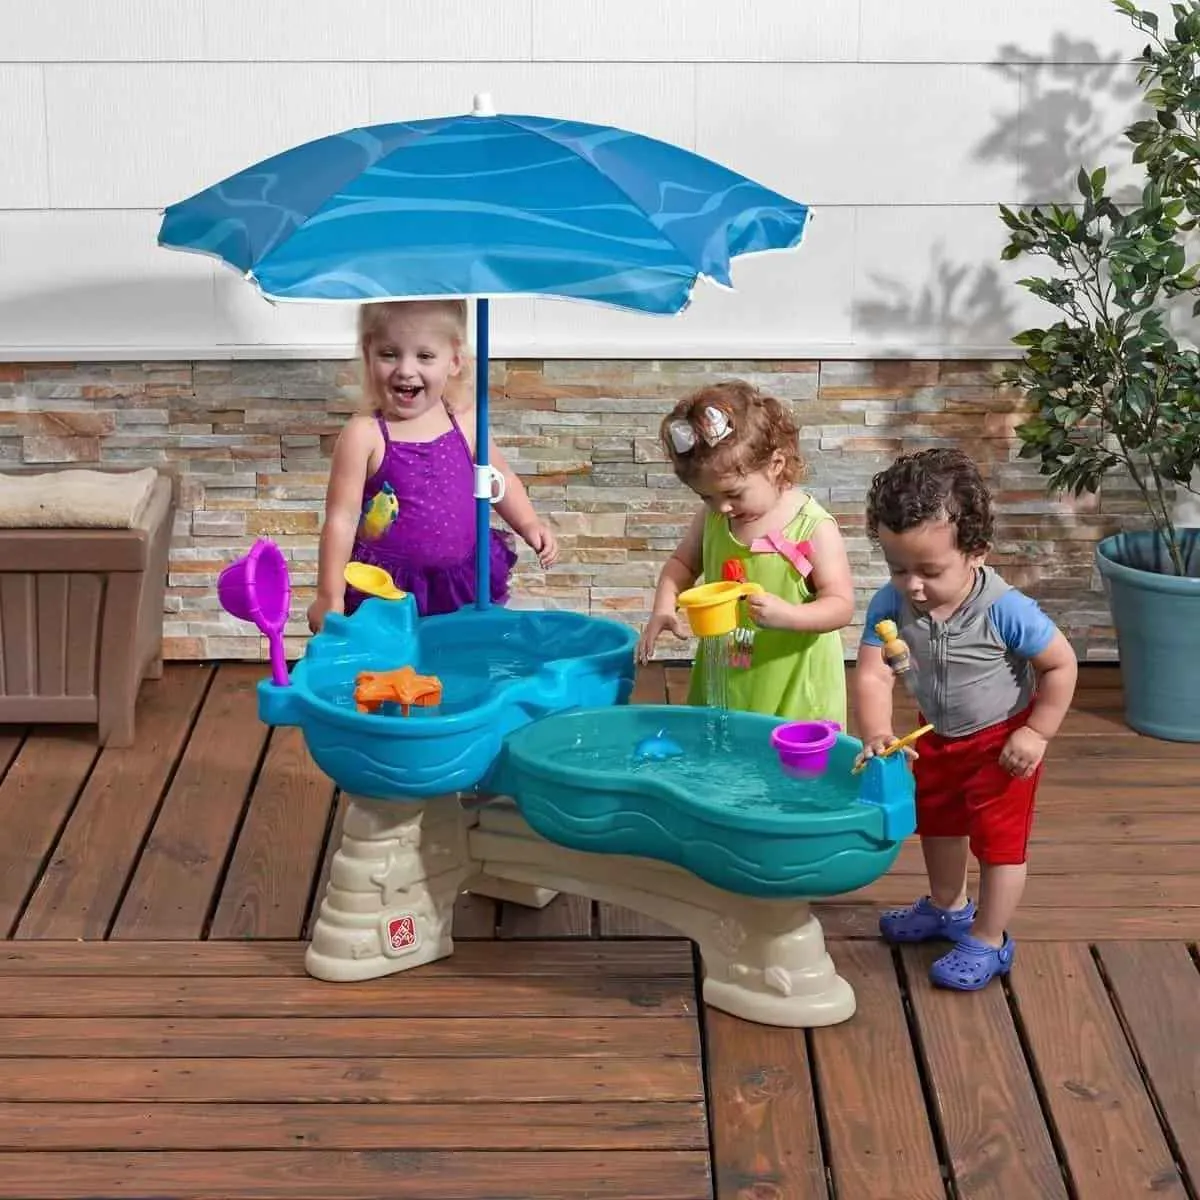 Kids playing spill and splash seaway water table.